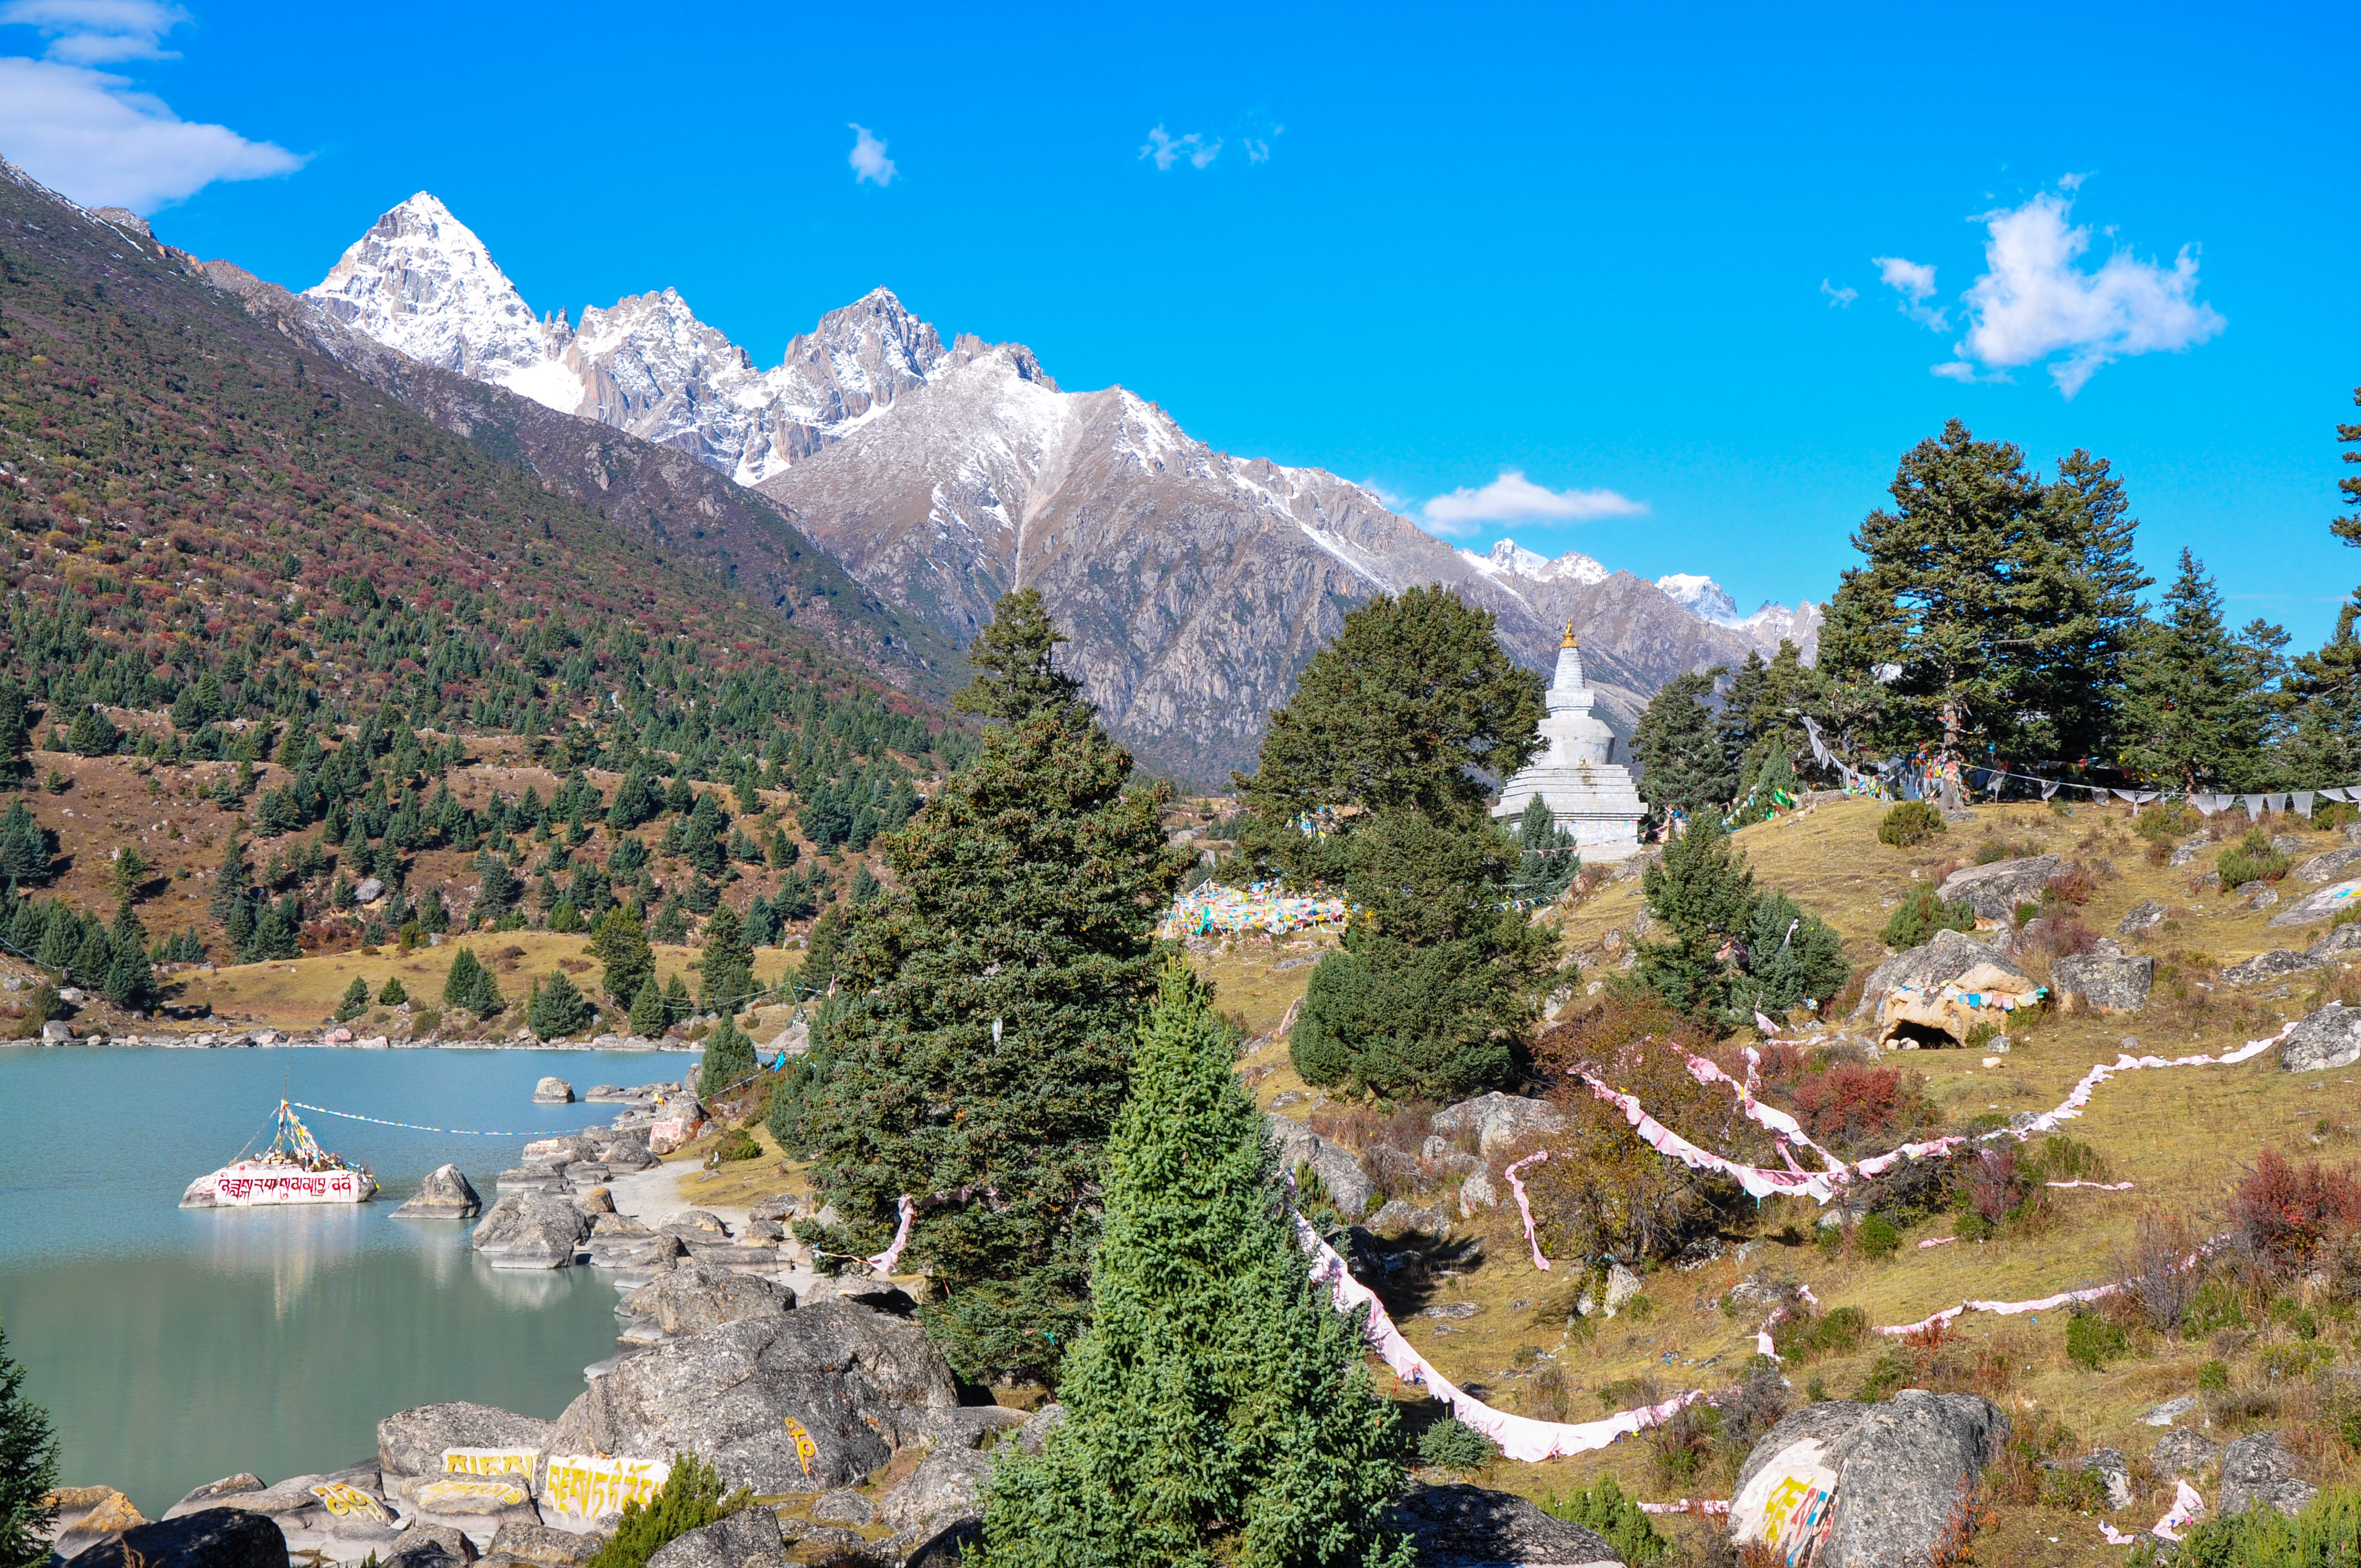 The view of Yilun Lhatso Lake and Mount Chola 